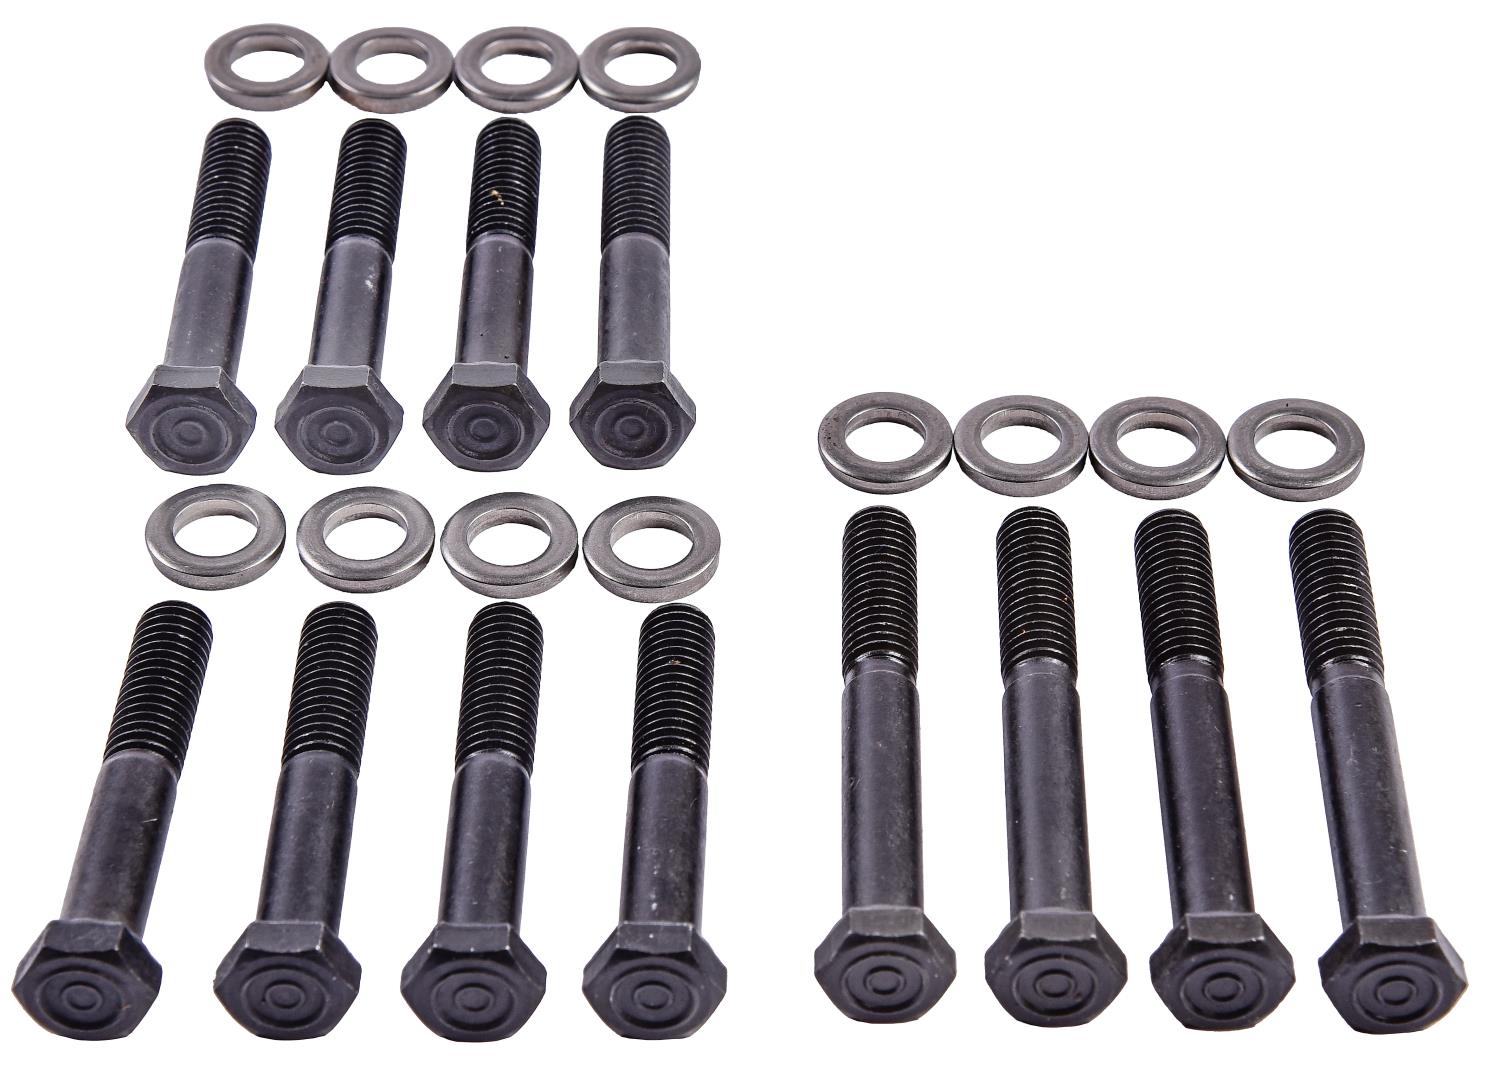 Exhaust Manifold Bolt Kit for 1957-1966 Small Block